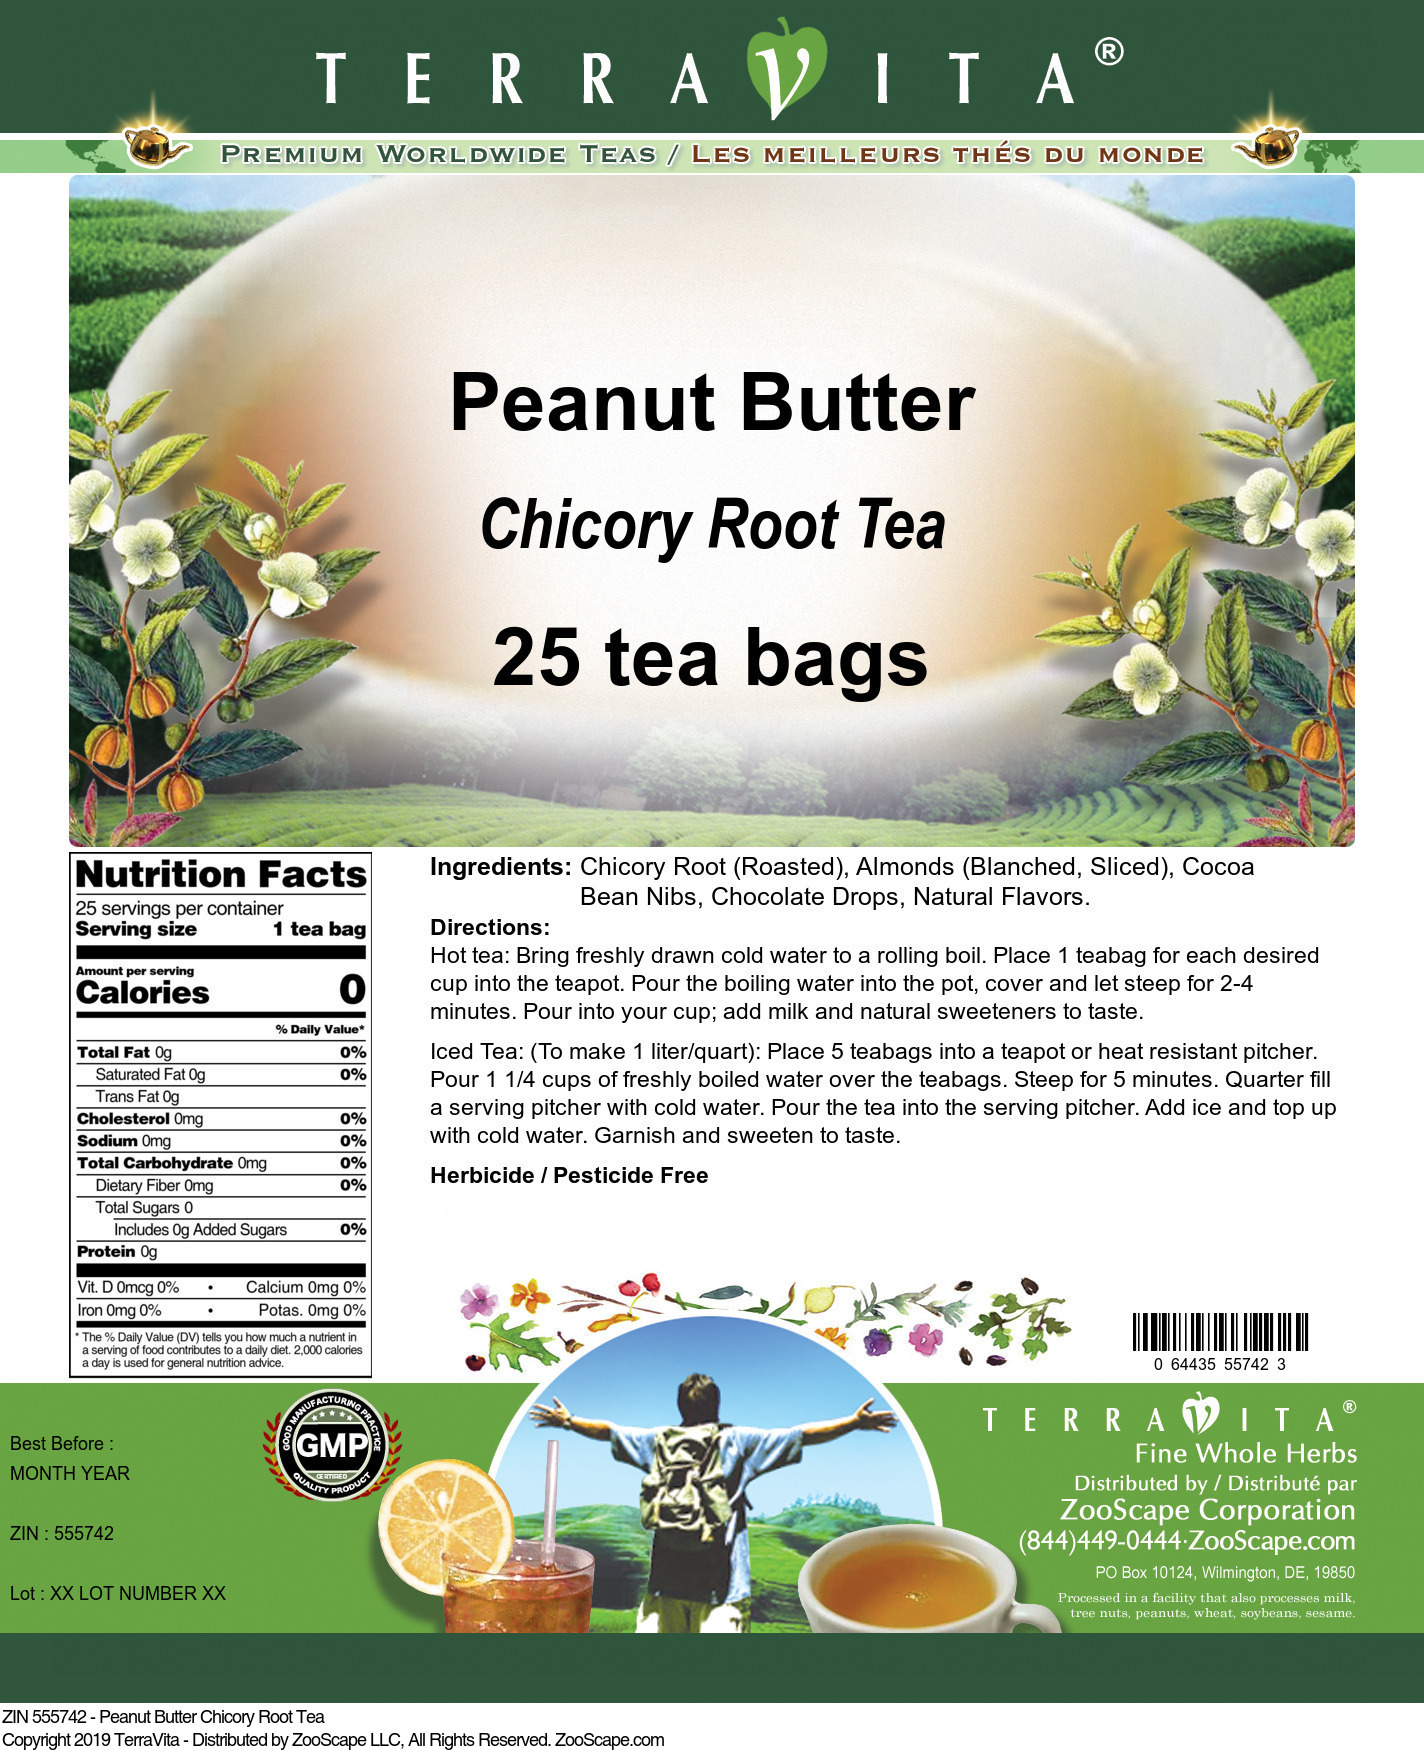 Peanut Butter Chicory Root Tea - Label